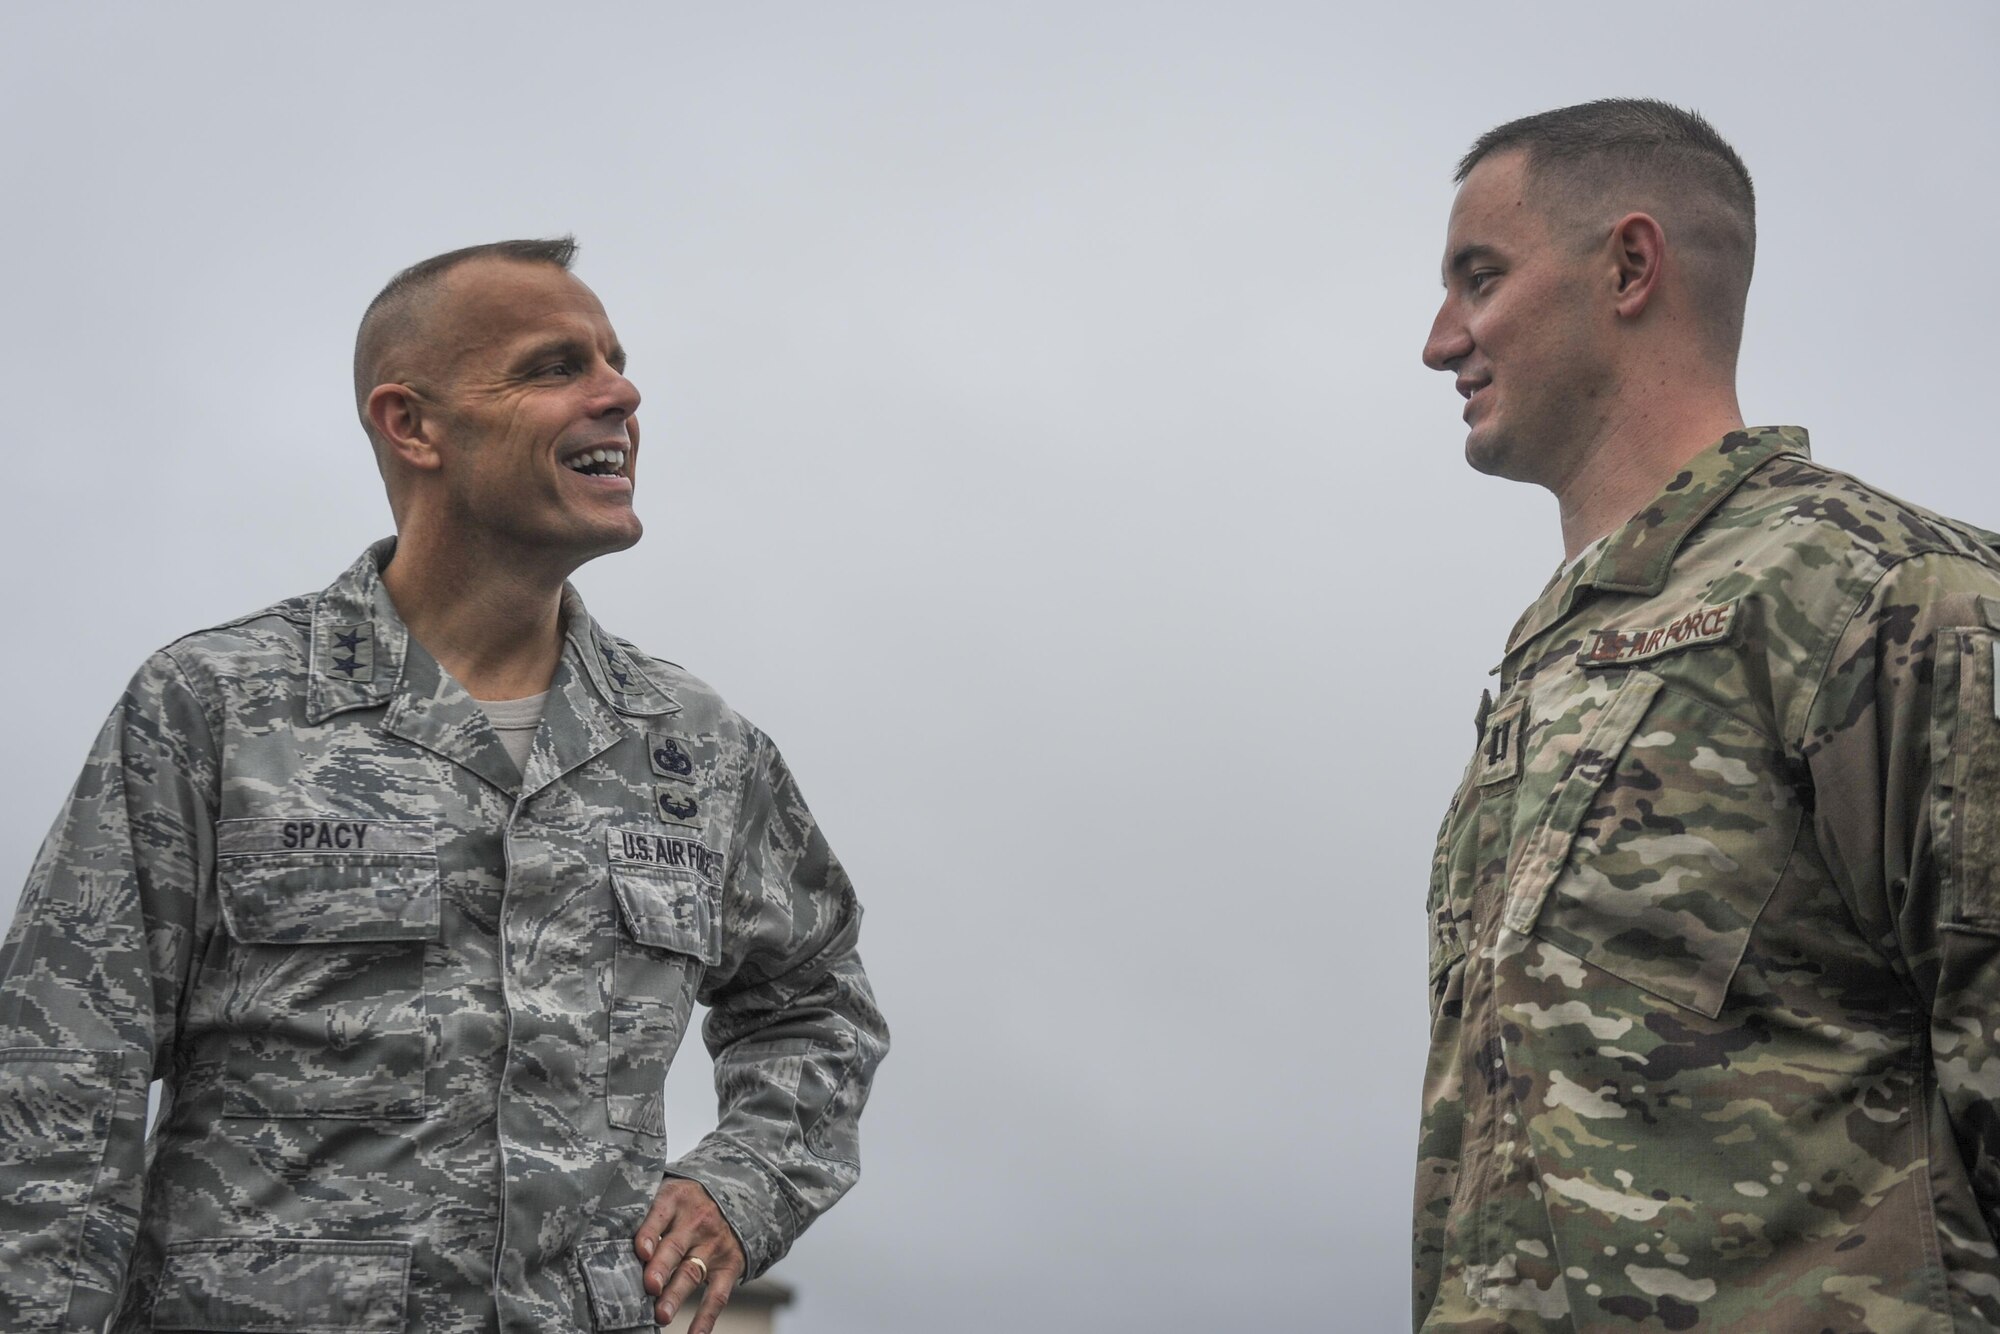 Maj. Gen. Bradley Spacy, left, the commander of the Air Force Installation and Mission Support Center, speaks with Capt. Justin May, operations officer with the 1st Special Operations Security Forces Squadron, at Hurlburt Field, Fla., Dec. 14, 2016. Spacy observed capability demonstrations such as the 1st Special Operations Logistics Readiness Squadron conducting a Forward Air Refueling Point. Special teams of fuels Airmen provide a critical capability for wartime and humanitarian missions as FARP operations expand the role of special operation forces around the world. They provide a means of "hot" refueling from a tanker aircraft to various types of fixed and rotor-wing receiver aircraft. (U.S. Air Force photo by Airman Dennis Spain)